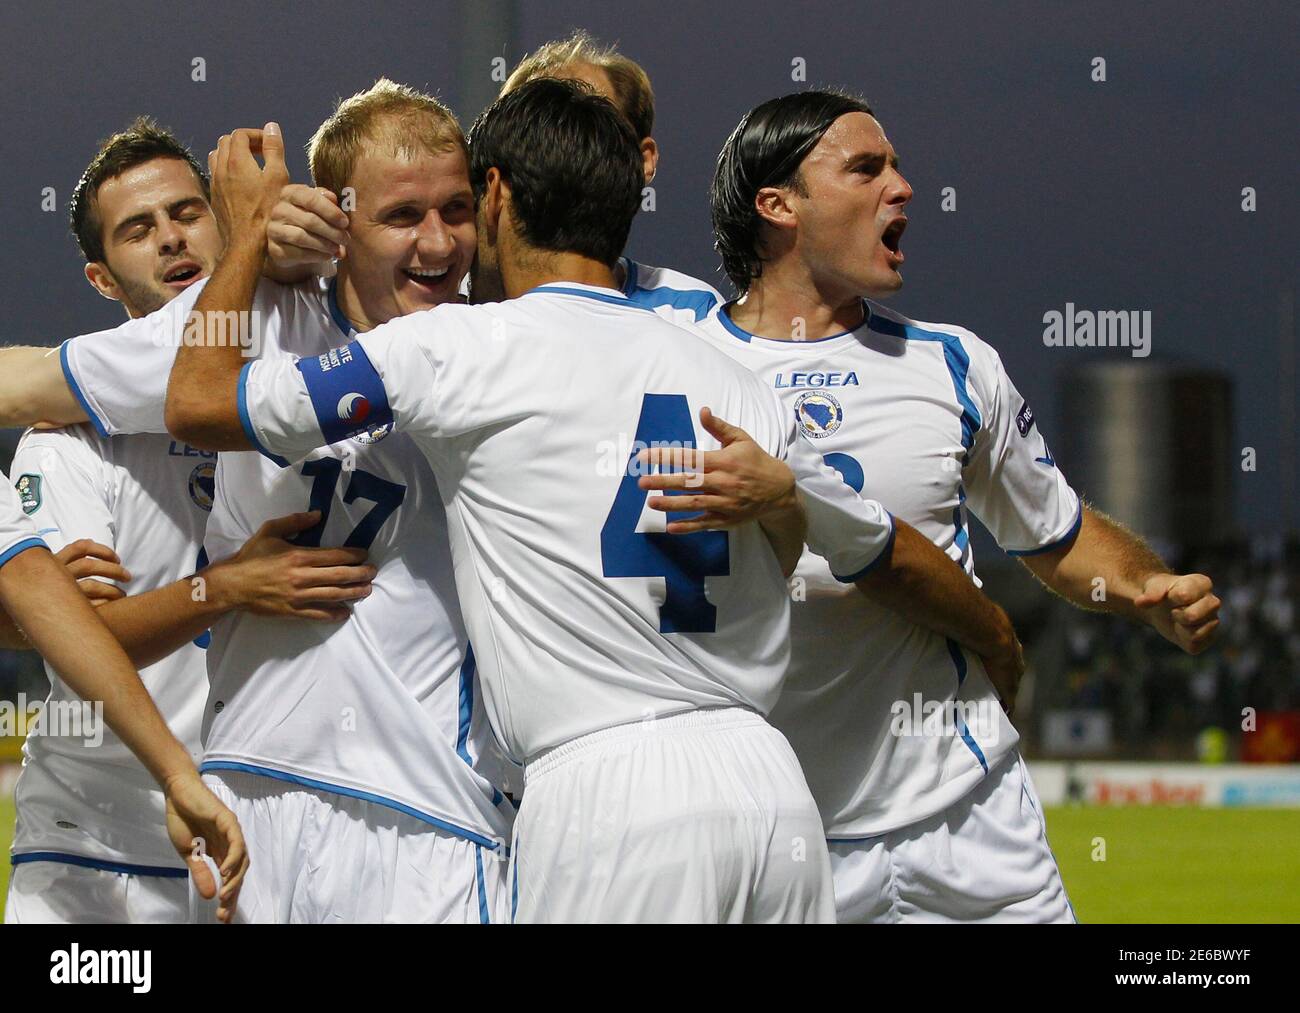 Bosnia's Senijad Ibricic (2nd L) celebrates with team mates his goal  against Luxembourg during their Euro 2012 qualifying soccer match in  Luxembourg September 3, 2010. REUTERS/Thierry Roge (LUXEMBOURG - Tags:  SPORT SOCCER